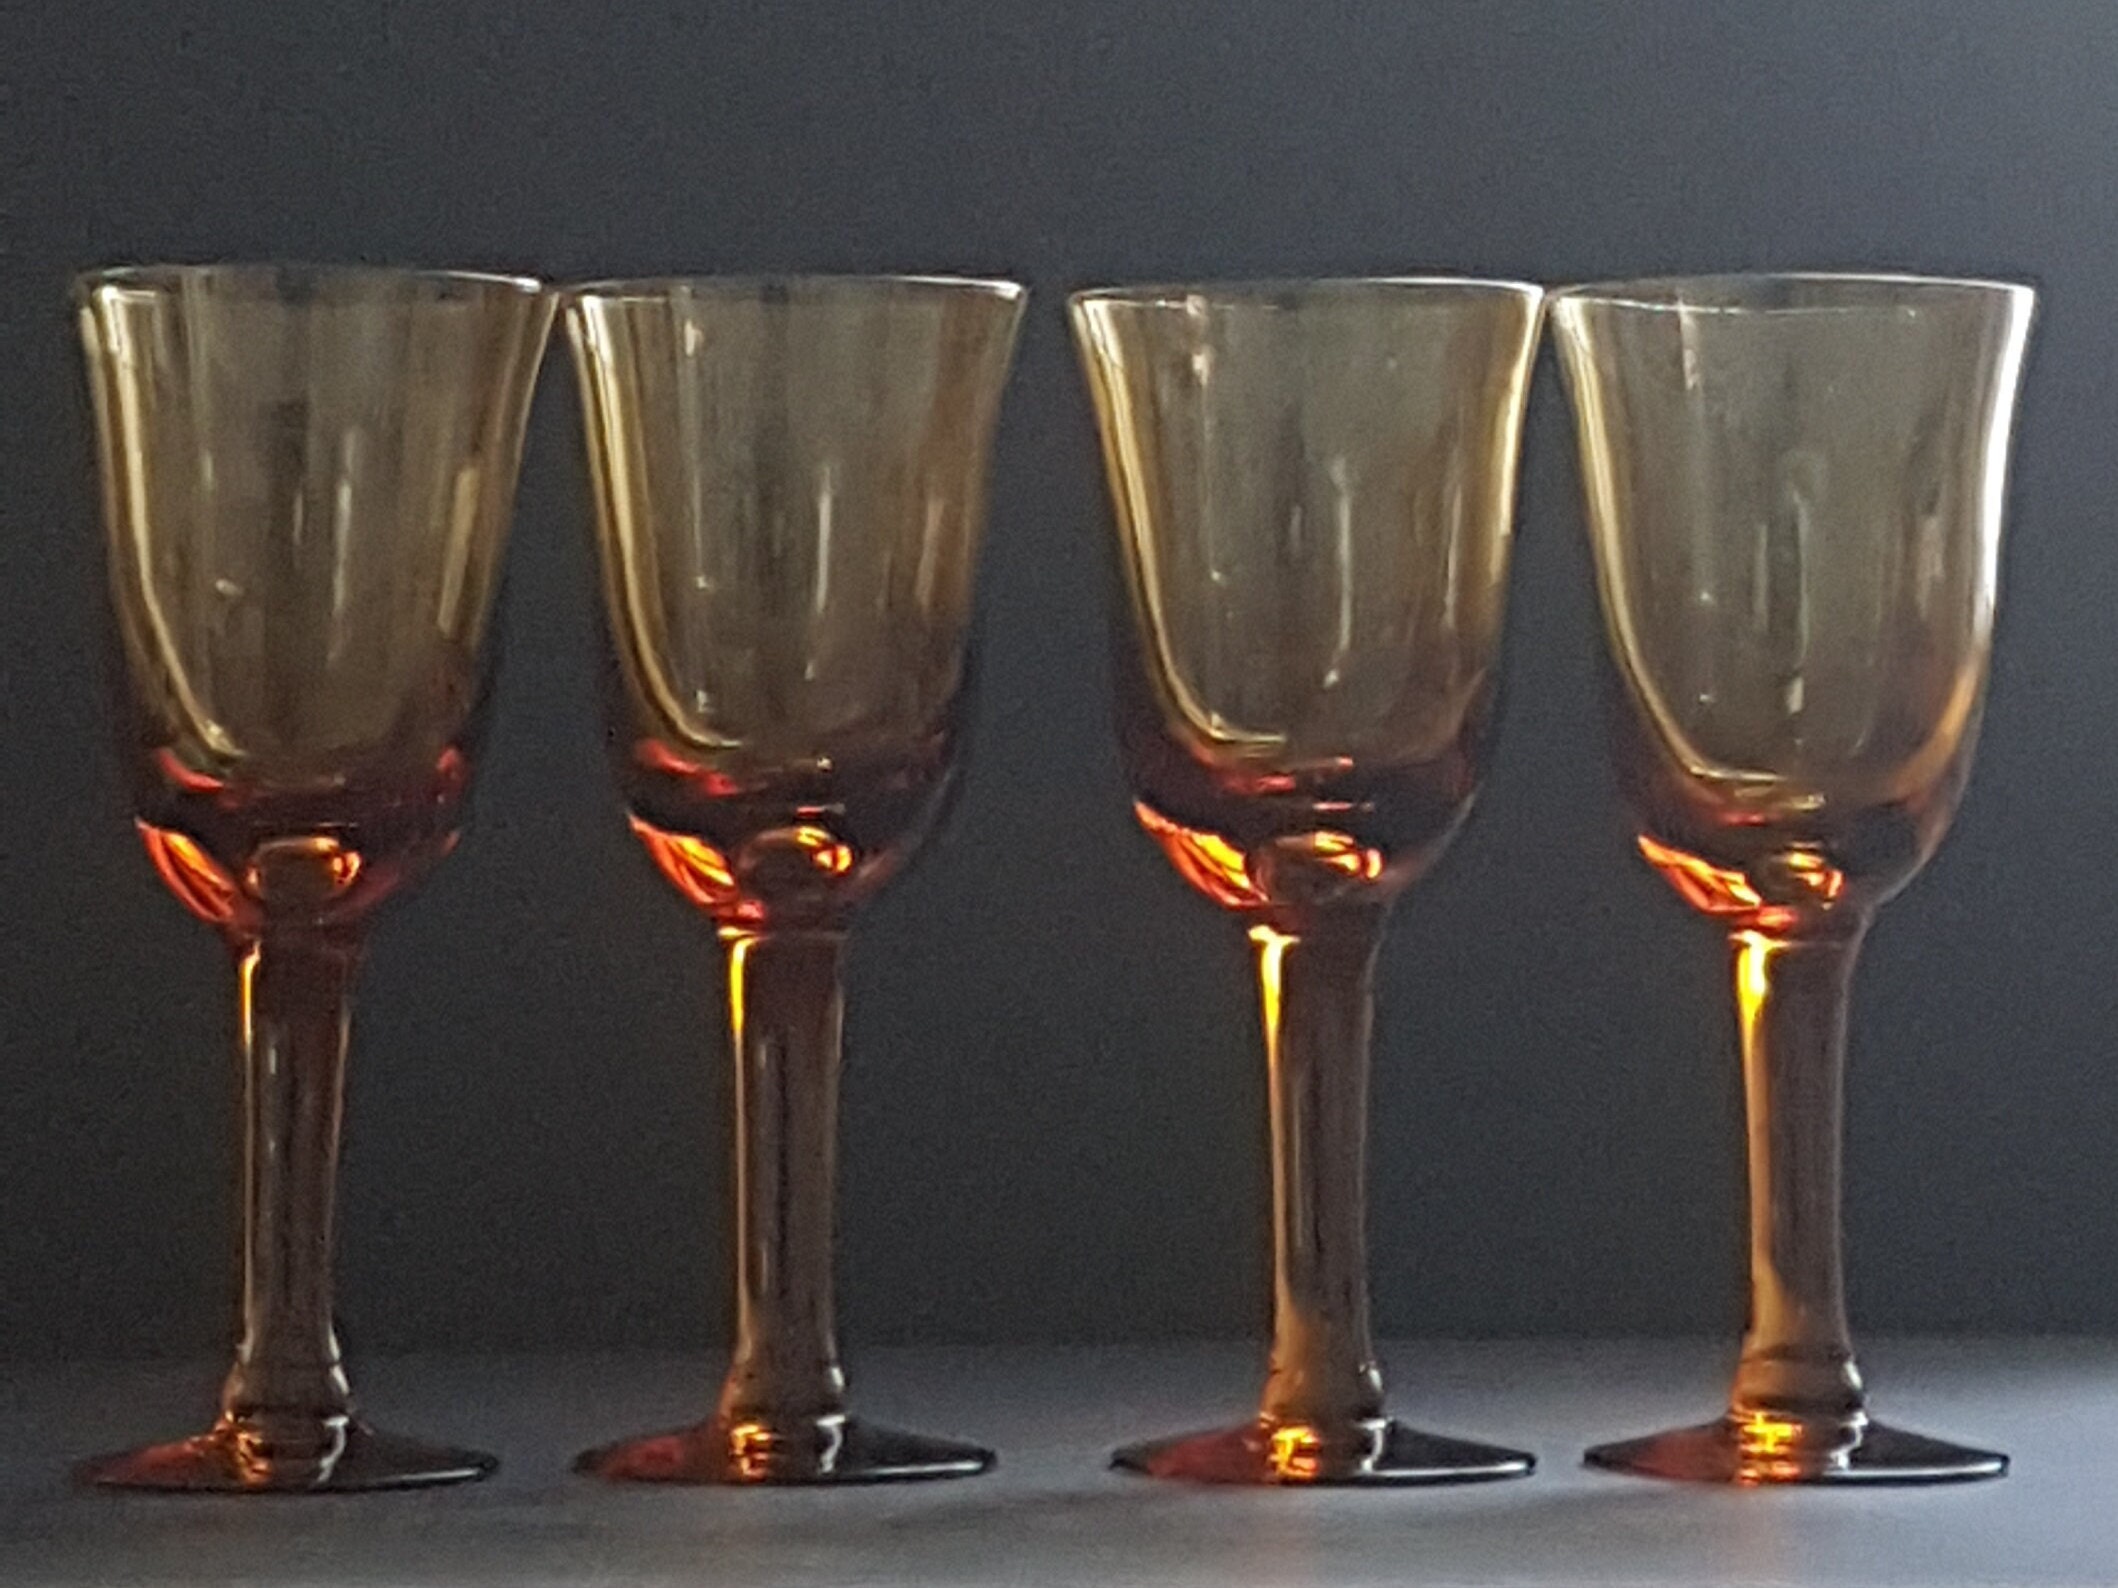 Taganov Amber Wine Glasses Set of 4 Vintage Drinking Glasses  10 OZ Colored Glassware Water Goblets Bulk Pretty Cups 300ml for Wedding  Party: Wine Glasses